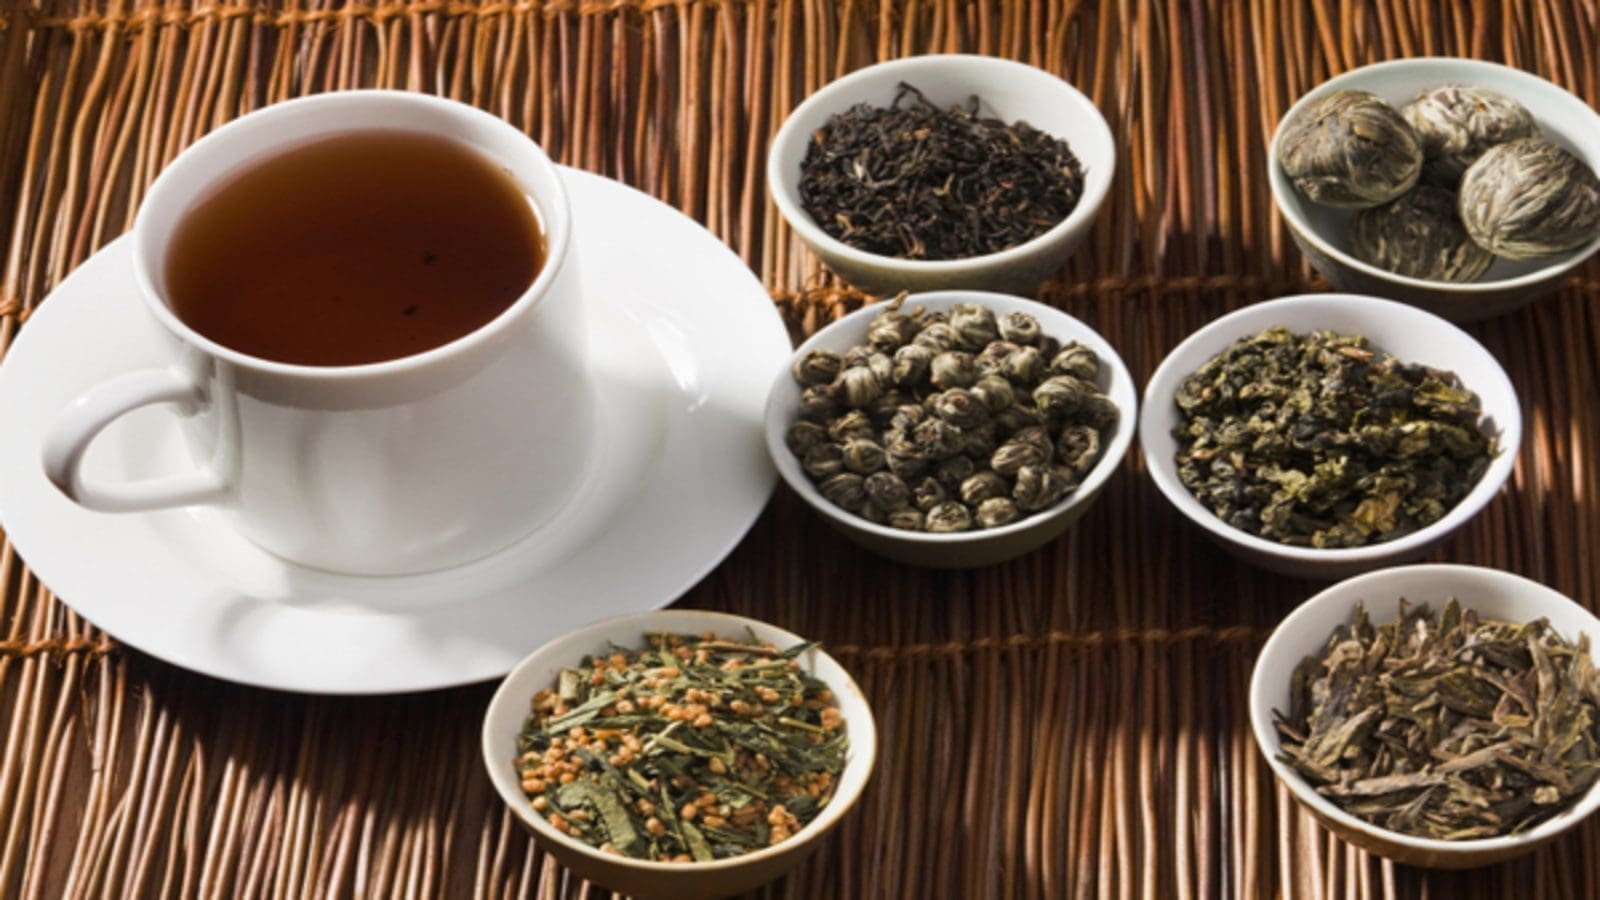 Flavored tea products are facing high demand in India amid new regulations to cap the flavor mix